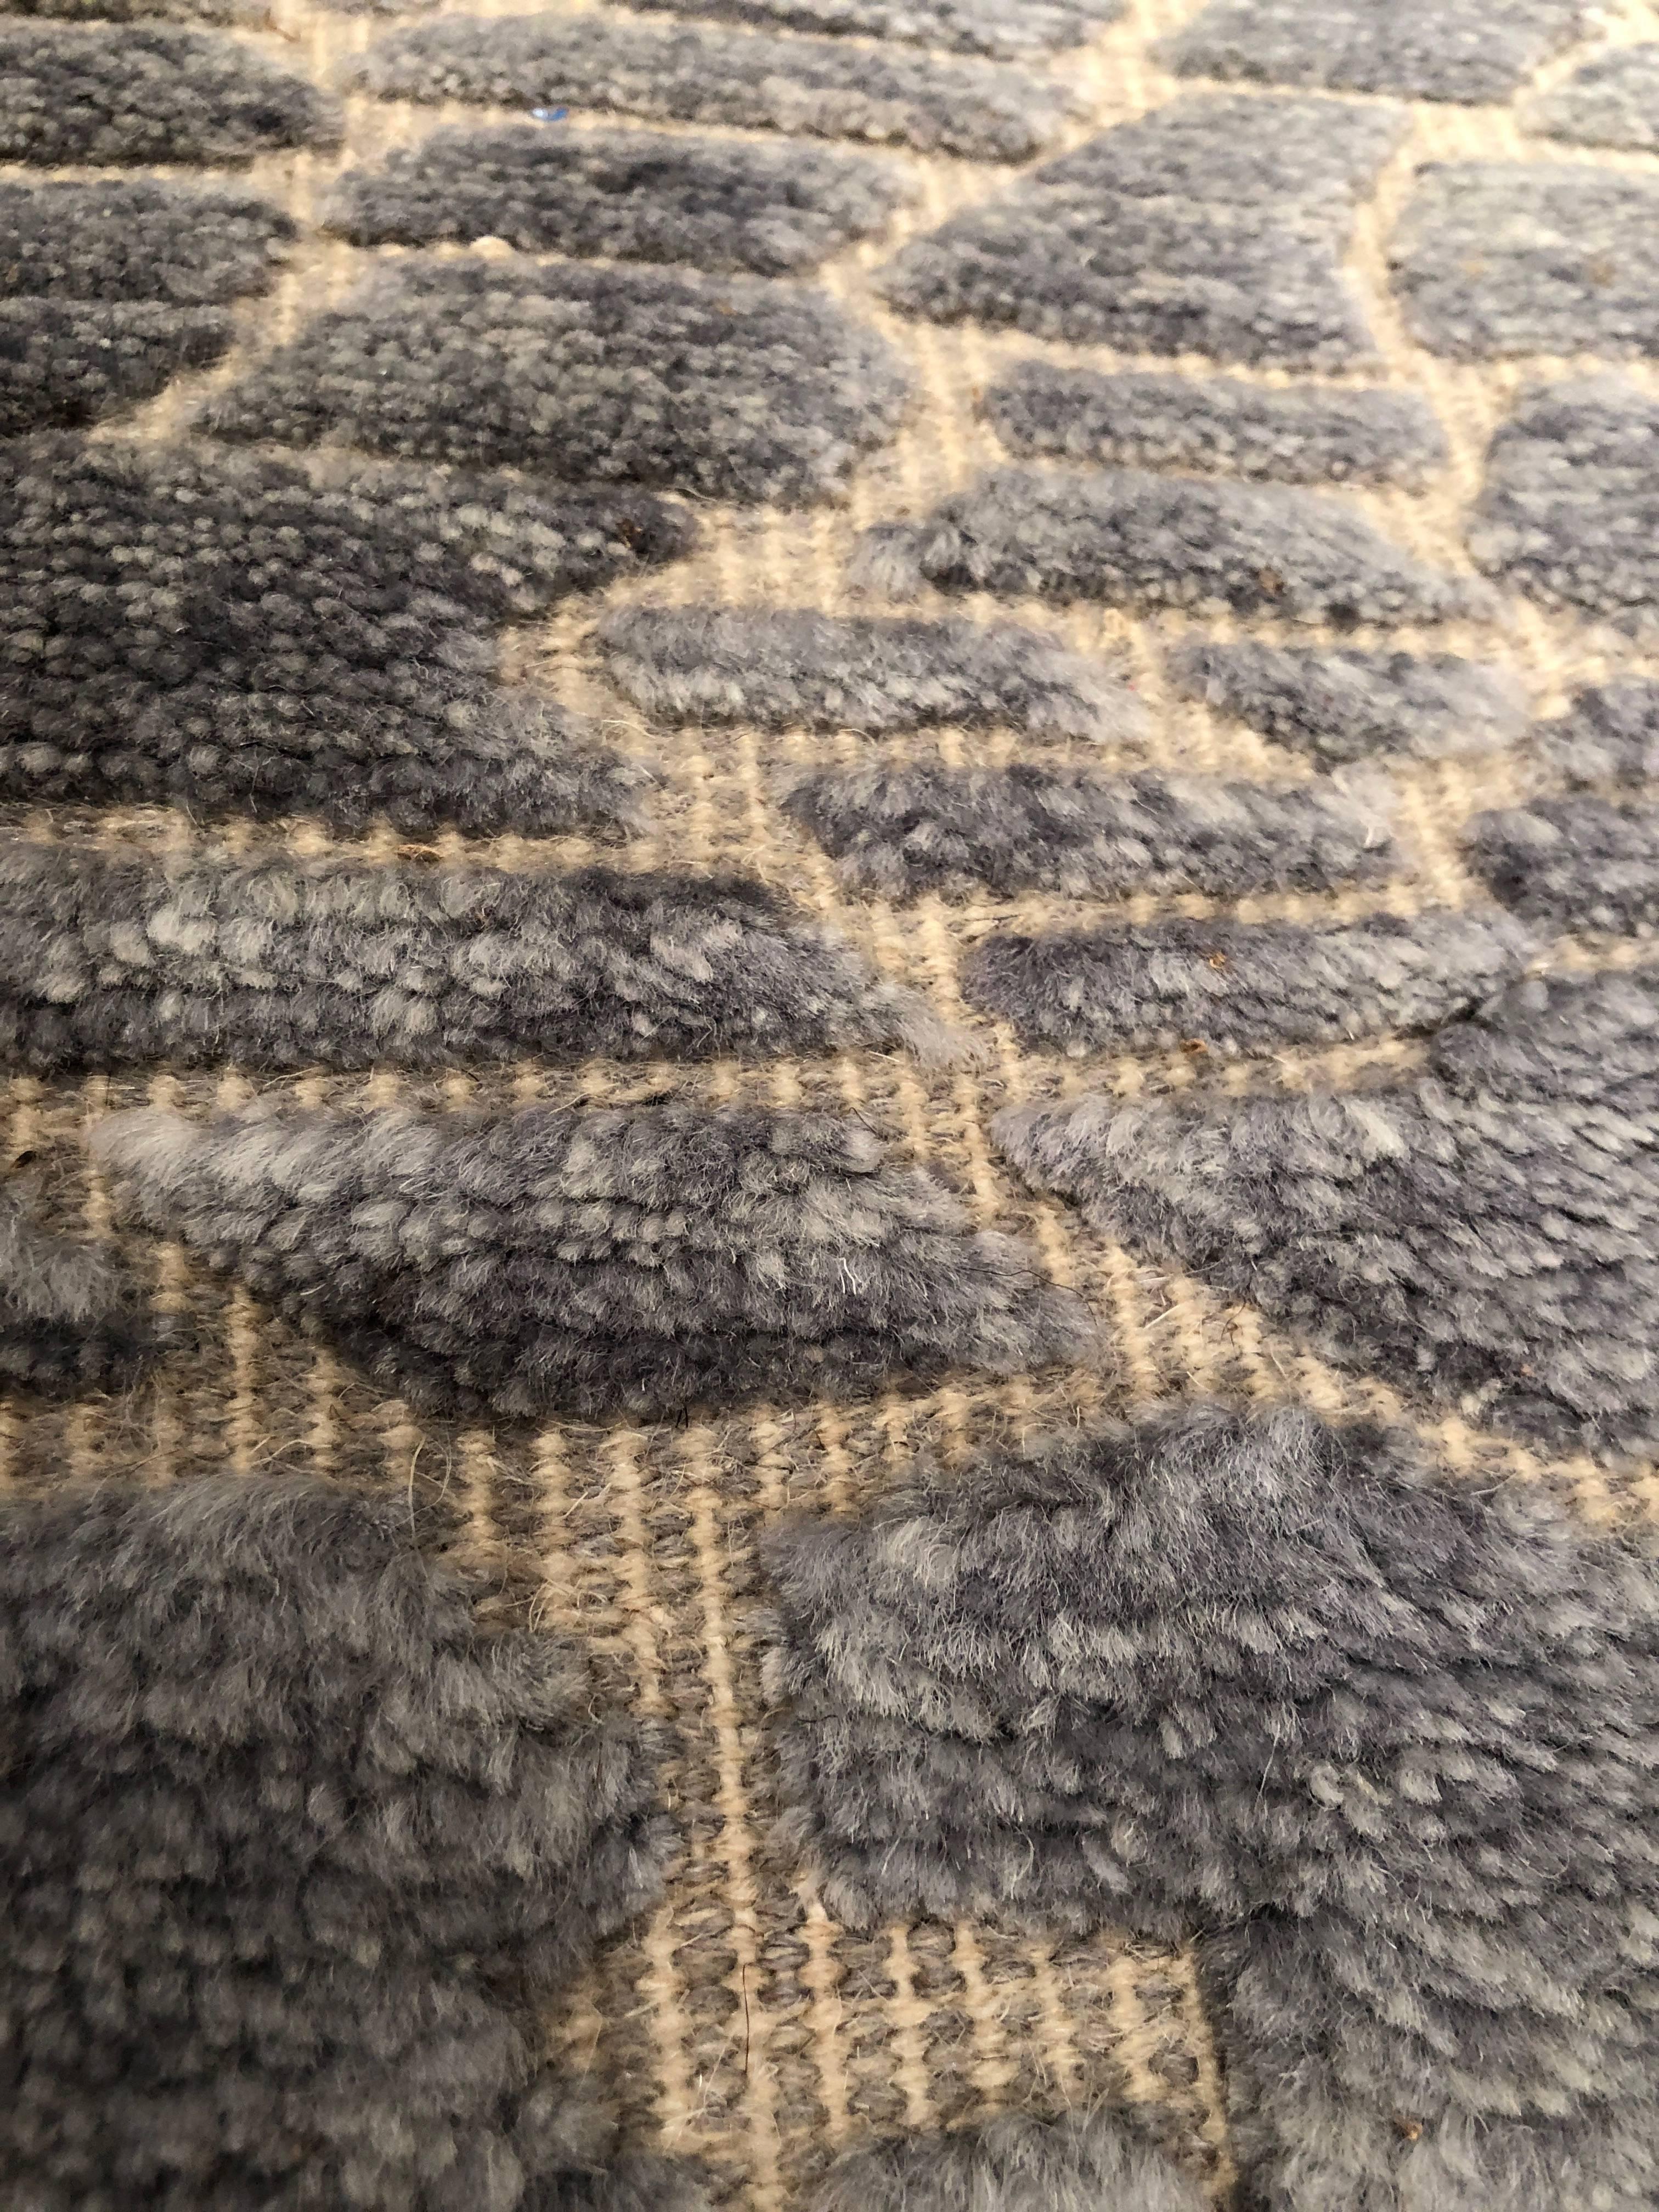 The reverse tufting of this deep blue rug creates wonderful texture for any room. The irregular patterns made by the flat-weave construction in between the hand-knotted tufting makes this a true beauty in both construction and usability in a room.